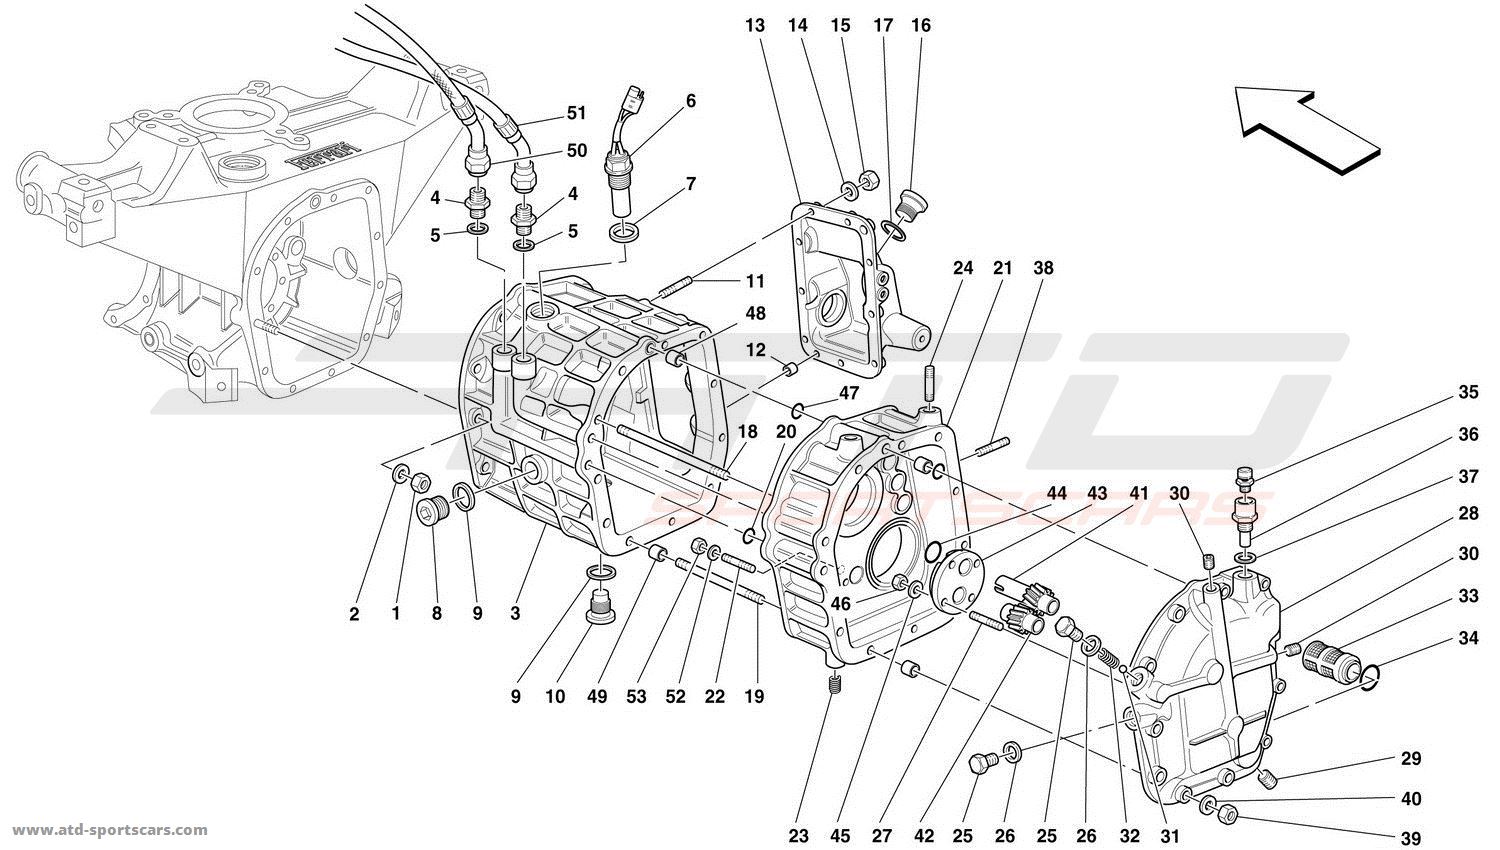 REAR PART GEARBOXES HOUSING - COVERS AND LUBRICATION